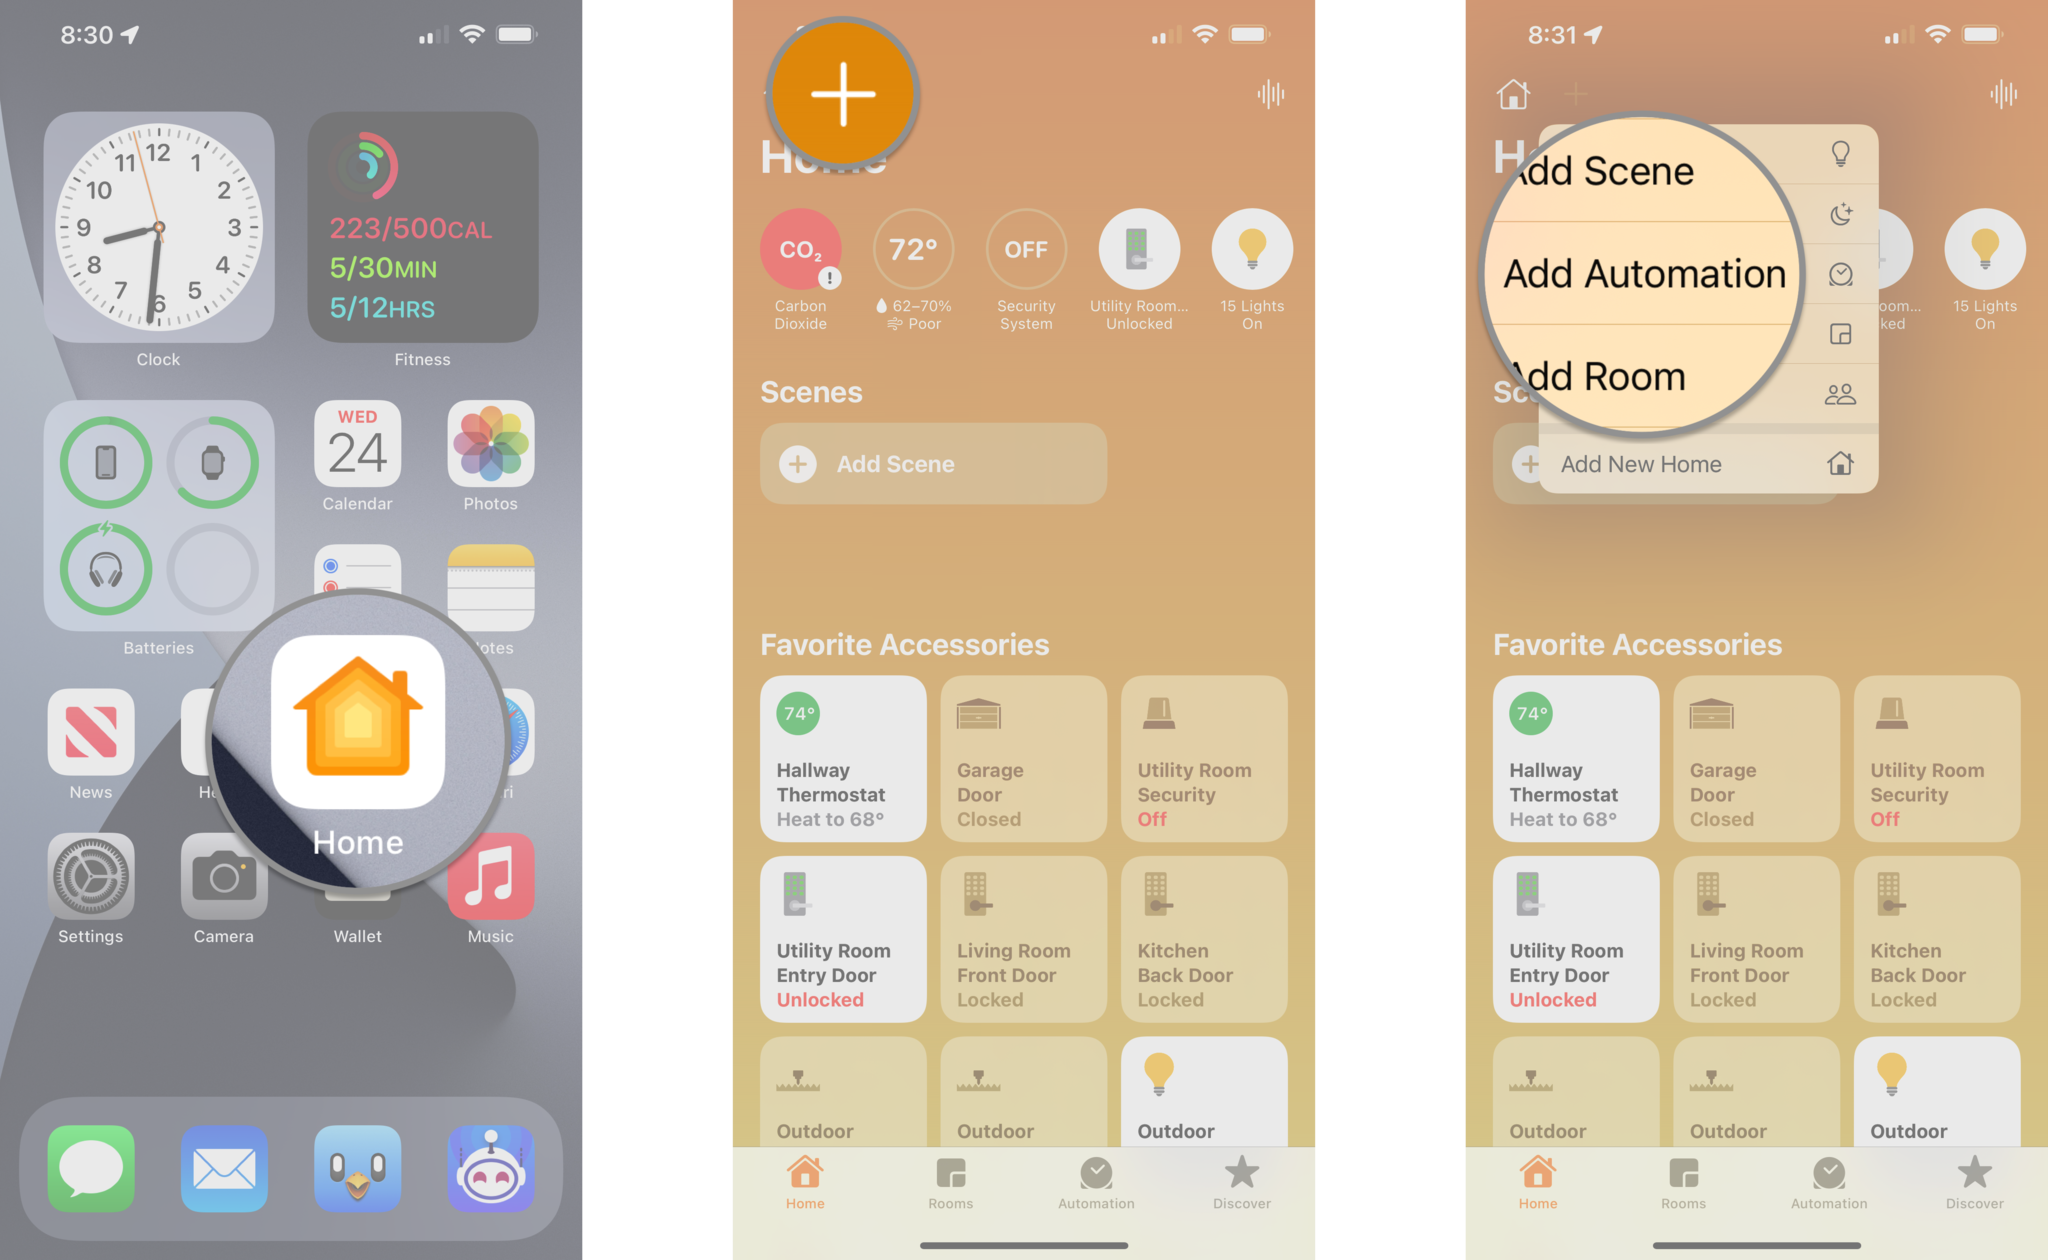 How to create an accessory automation in the Home app on the iPhone by showing steps: Launch the Home app, Tap the plus icon, Tap Add Automation